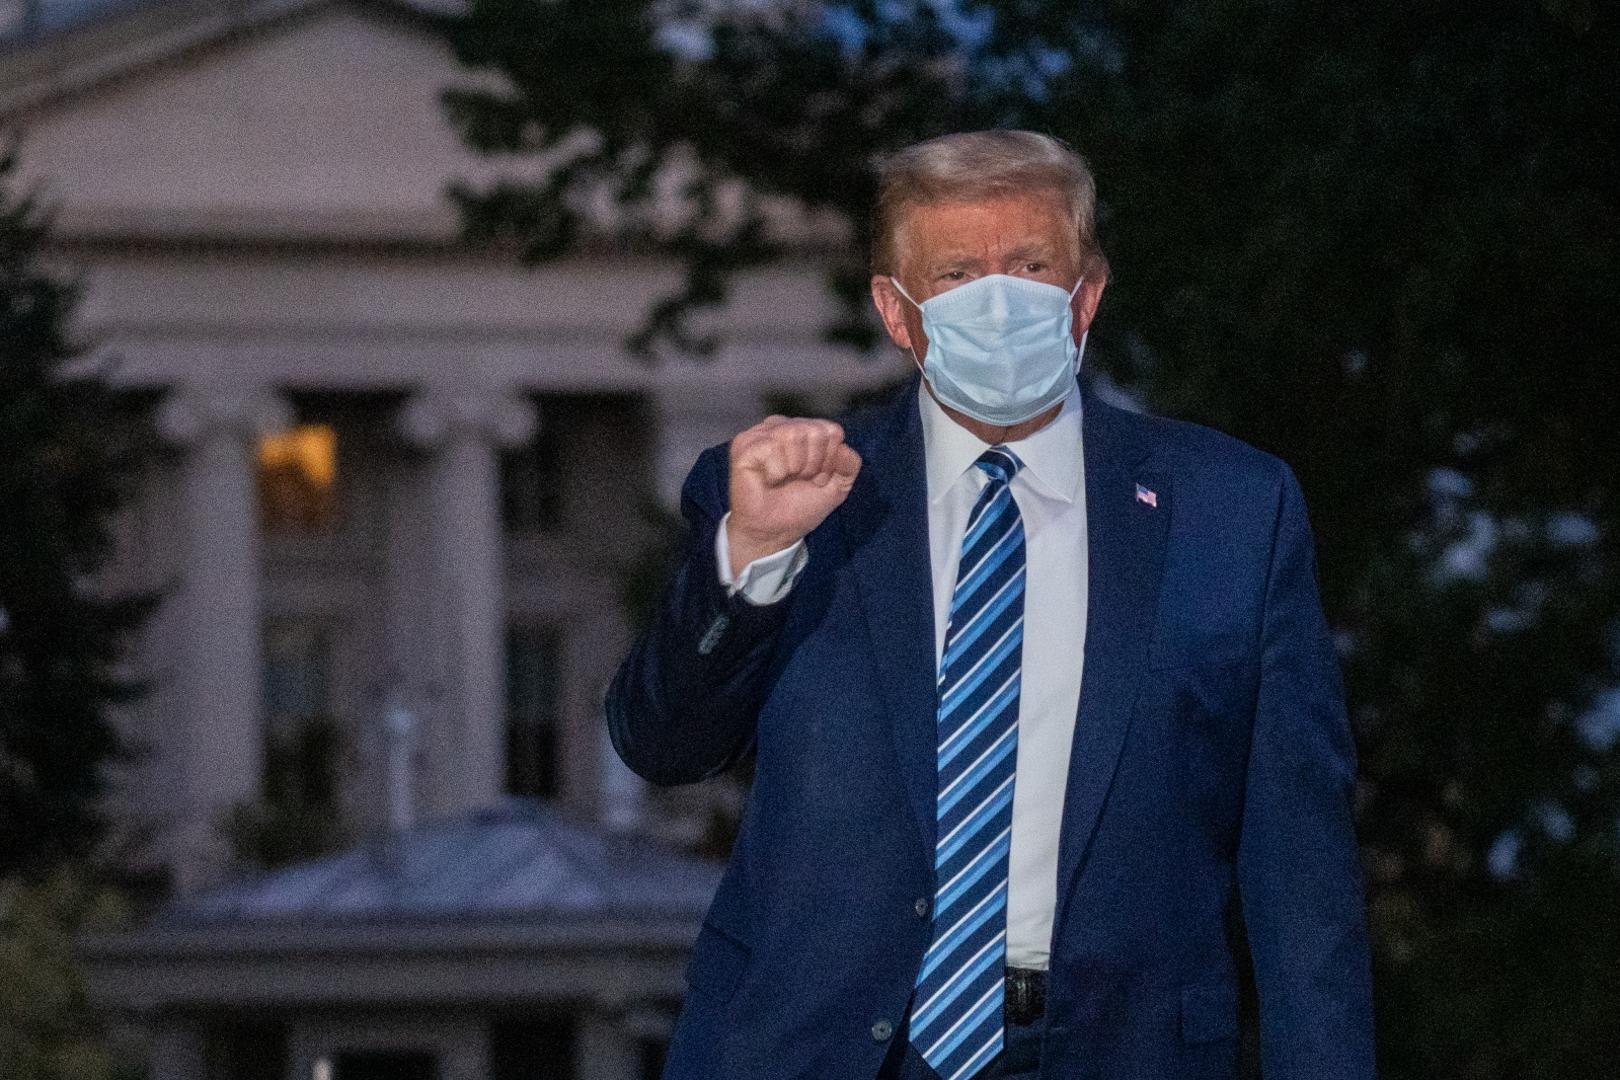 October 5, 2020 - Washington, DC, United States: President Donald J. Trump gestures to the press after getting off of Marine One following several days at Walter Reed National Military Medical Center for treatment for COVID19.  (Ken Cedeno / Polaris)
Credit: Ken Cedeno / Pool via CNP | usage worldwide /DPA/PIXSELL